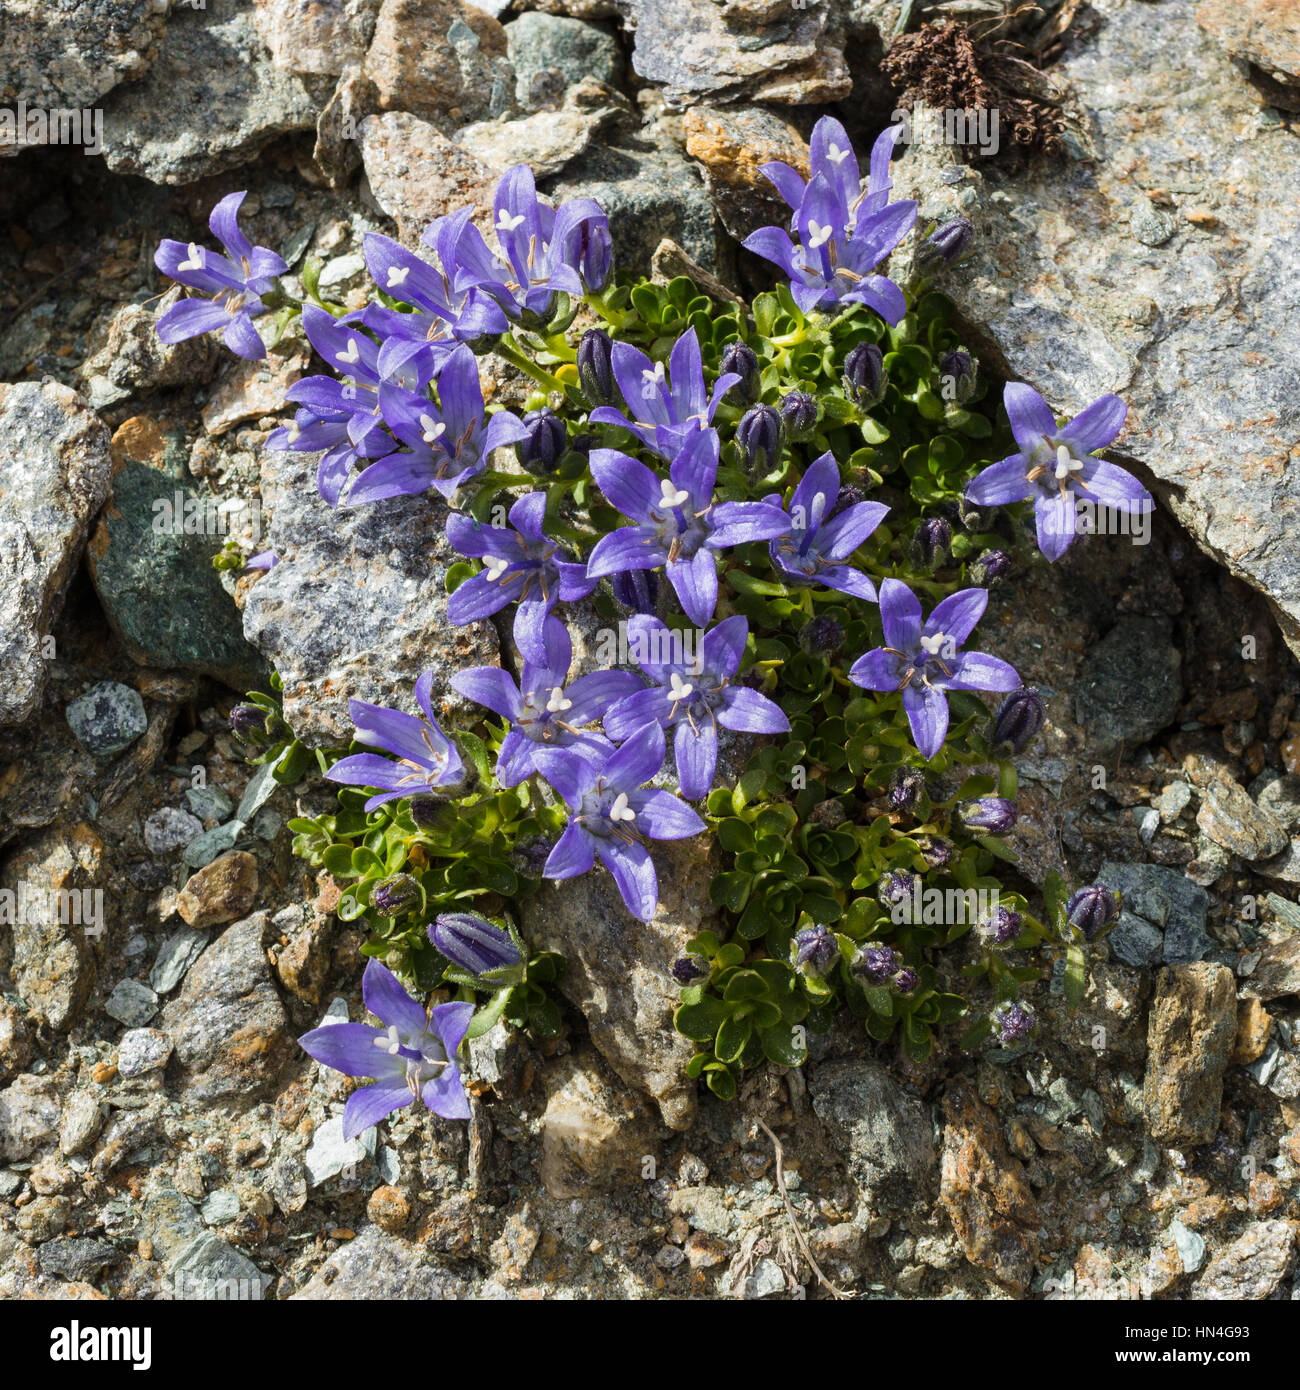 Alpine flower campanula cenisia (Mont Cenis Bellflower),  Aosta valley Italy. Photo taken at an altitude of 3100 meters. Stock Photo